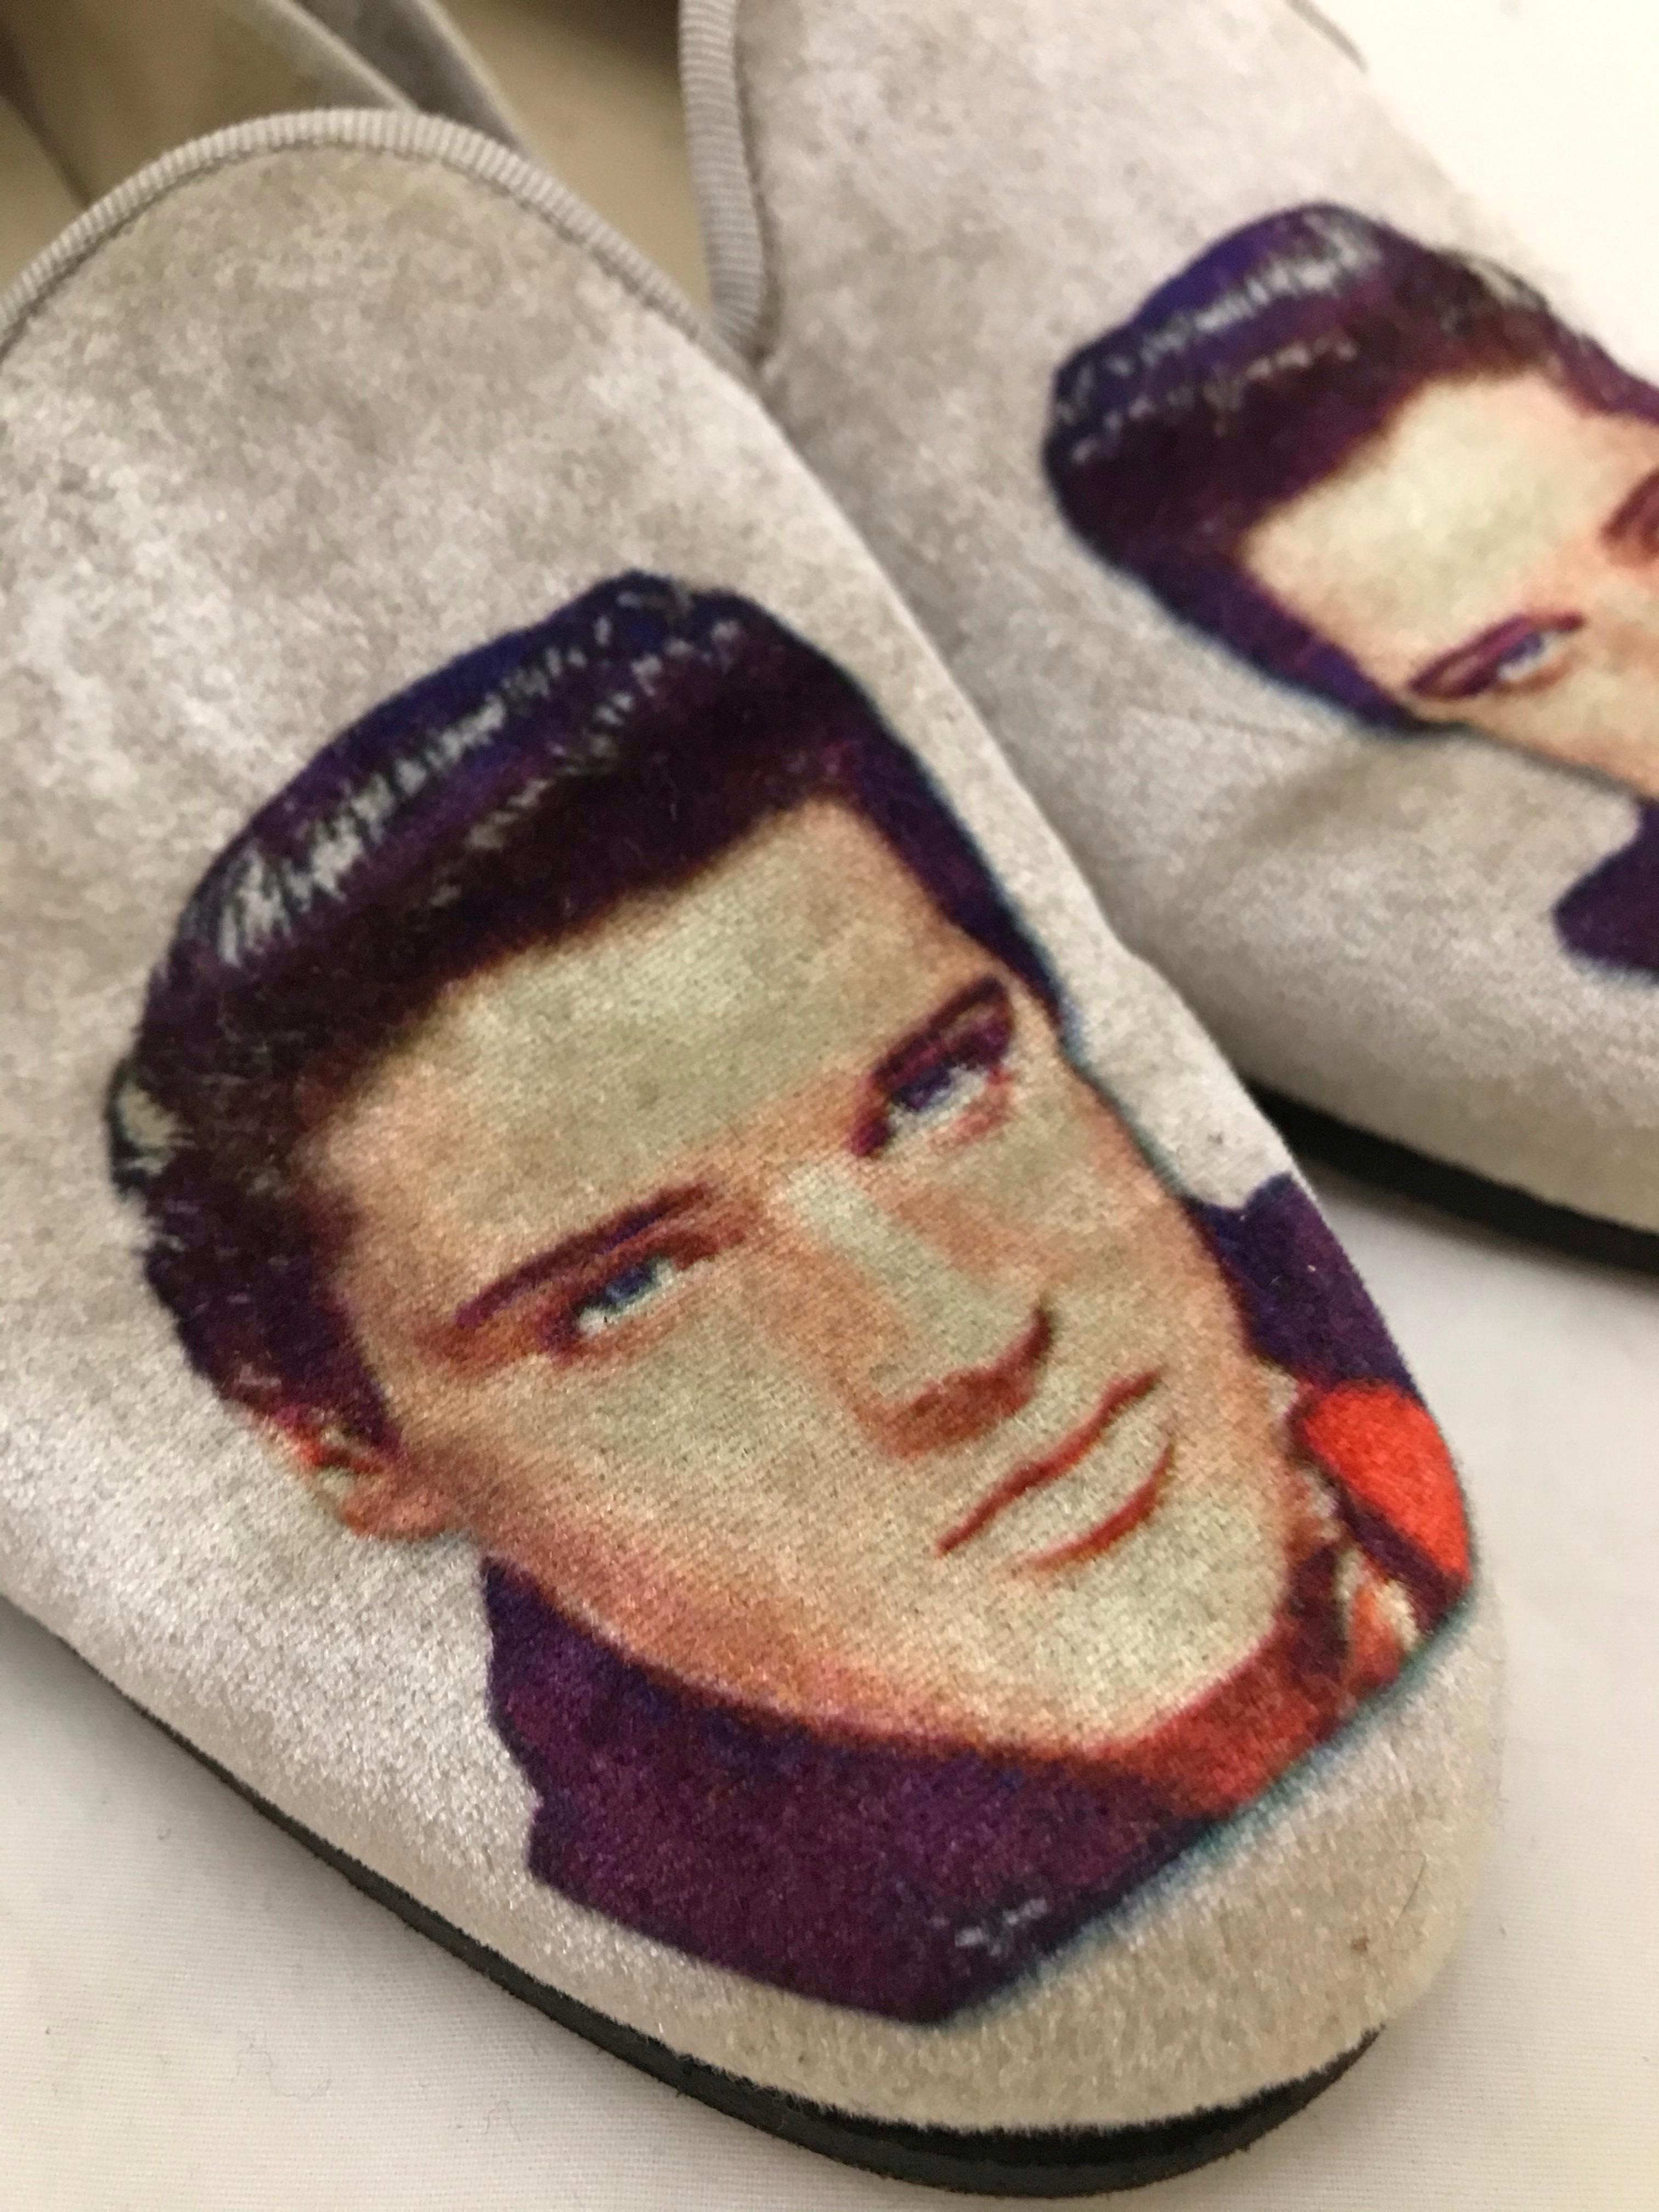 Attention all Elvis fans! Stubbs & Wootton produce bespoke and ready-to-wear luxury slippers. They take their name from two of the greatest 18th century British sporting artists, George Stubbs and John Wootton and exemplify the rich transatlantic